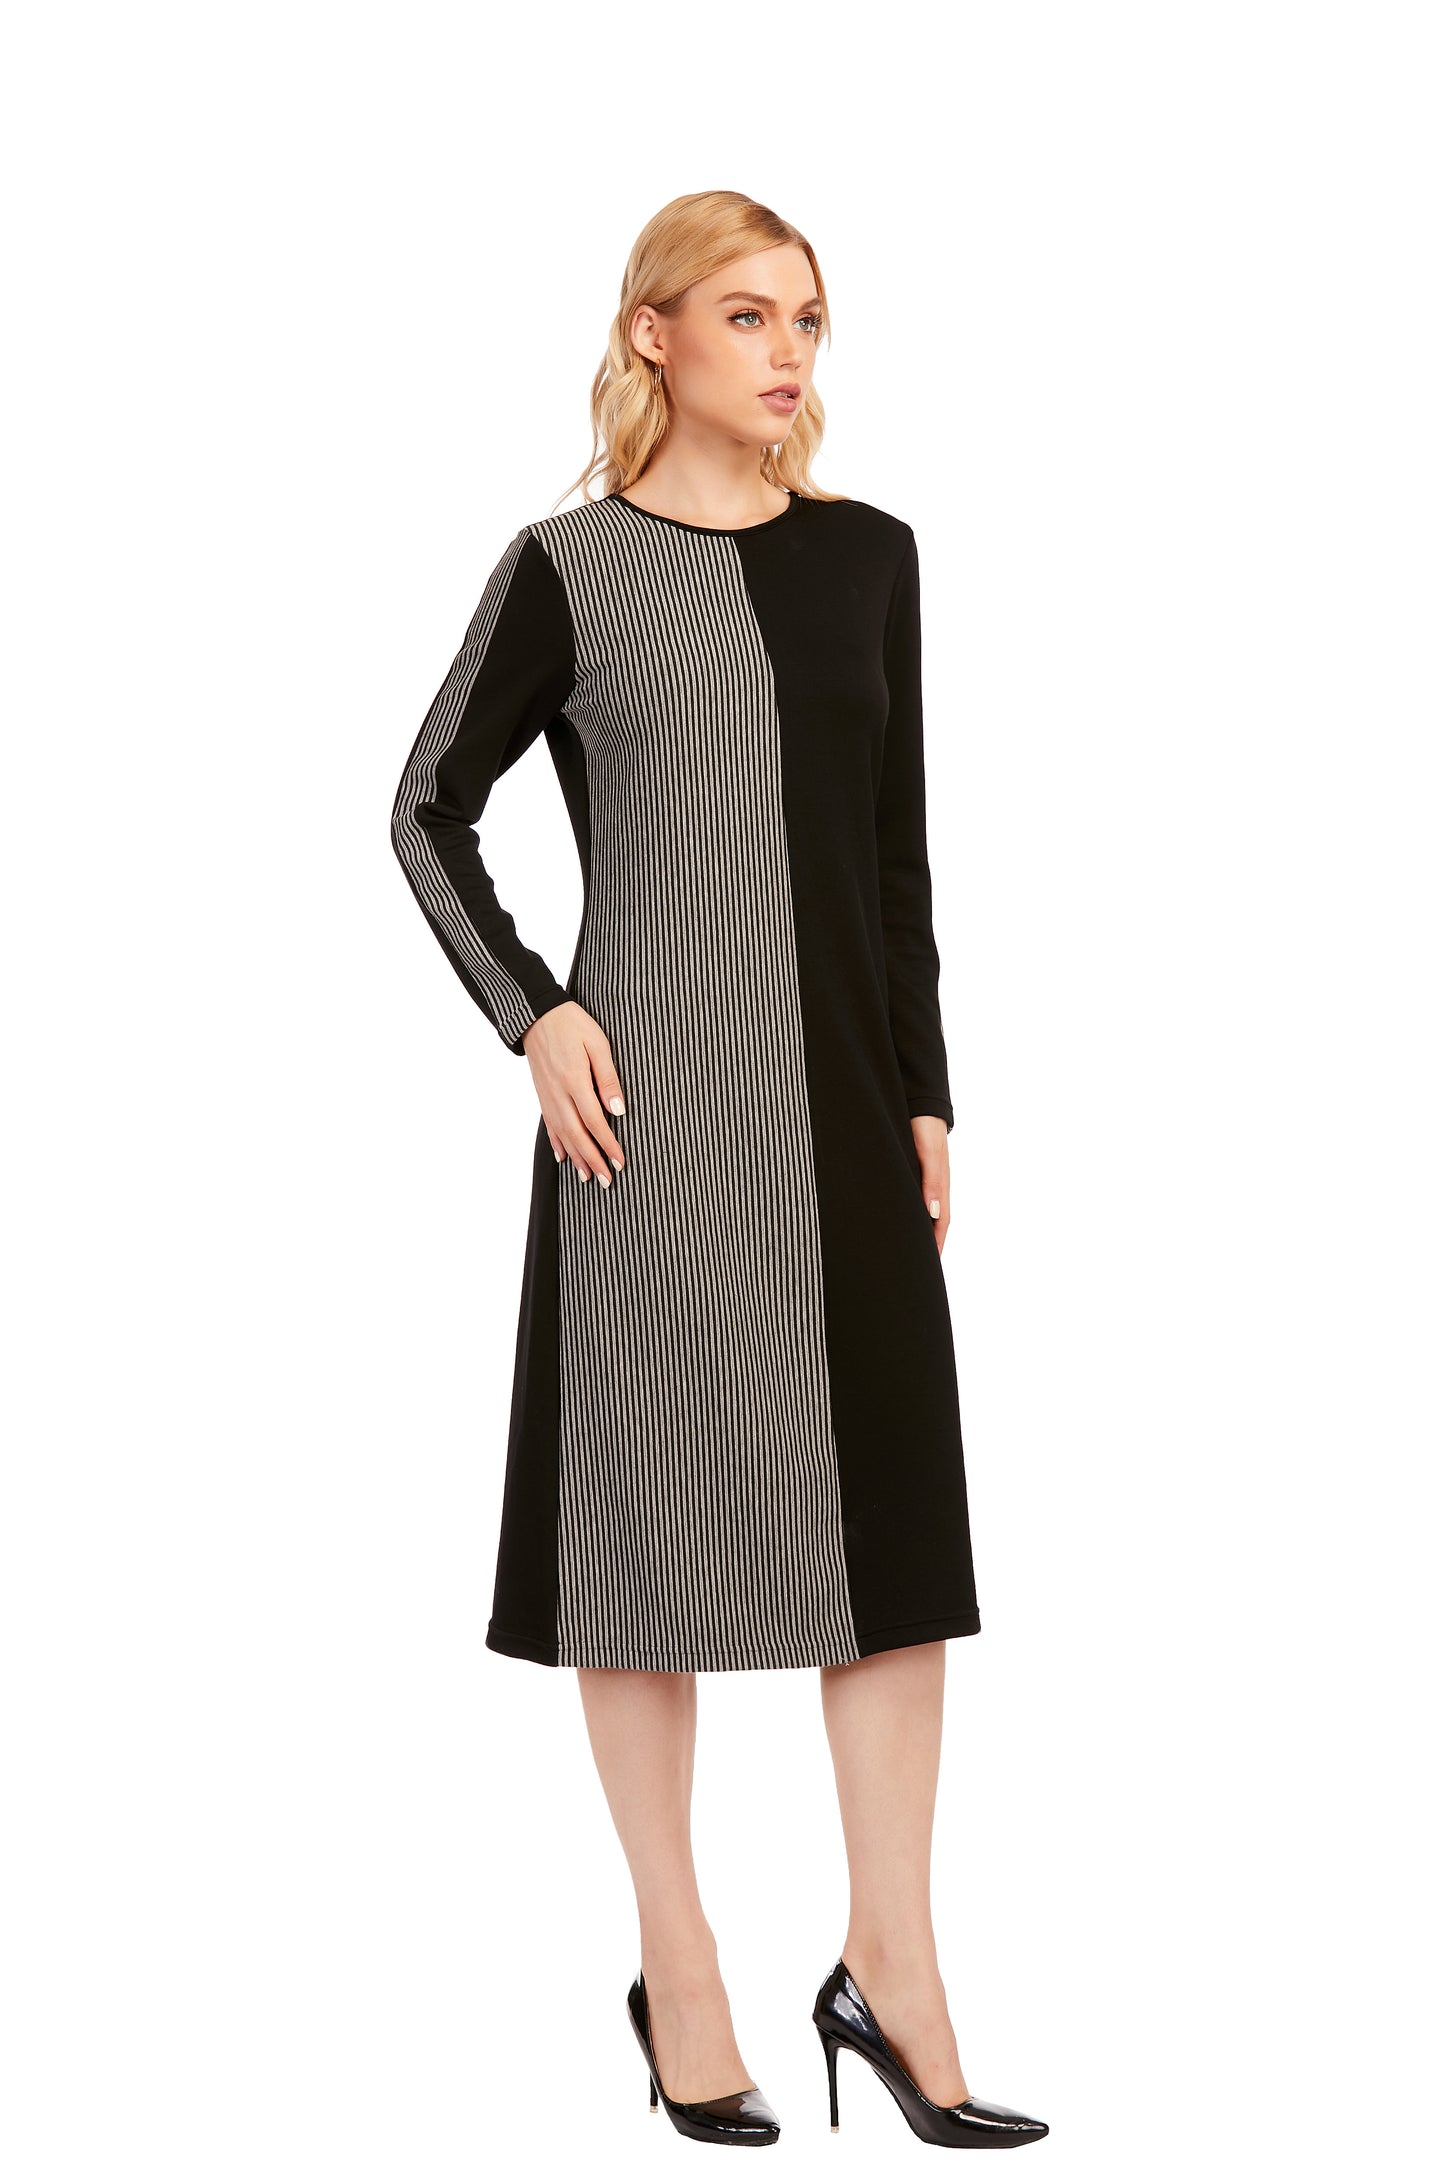 Striped & Solid Modest Knitted Long Sleeve Dress - MissFinchNYC